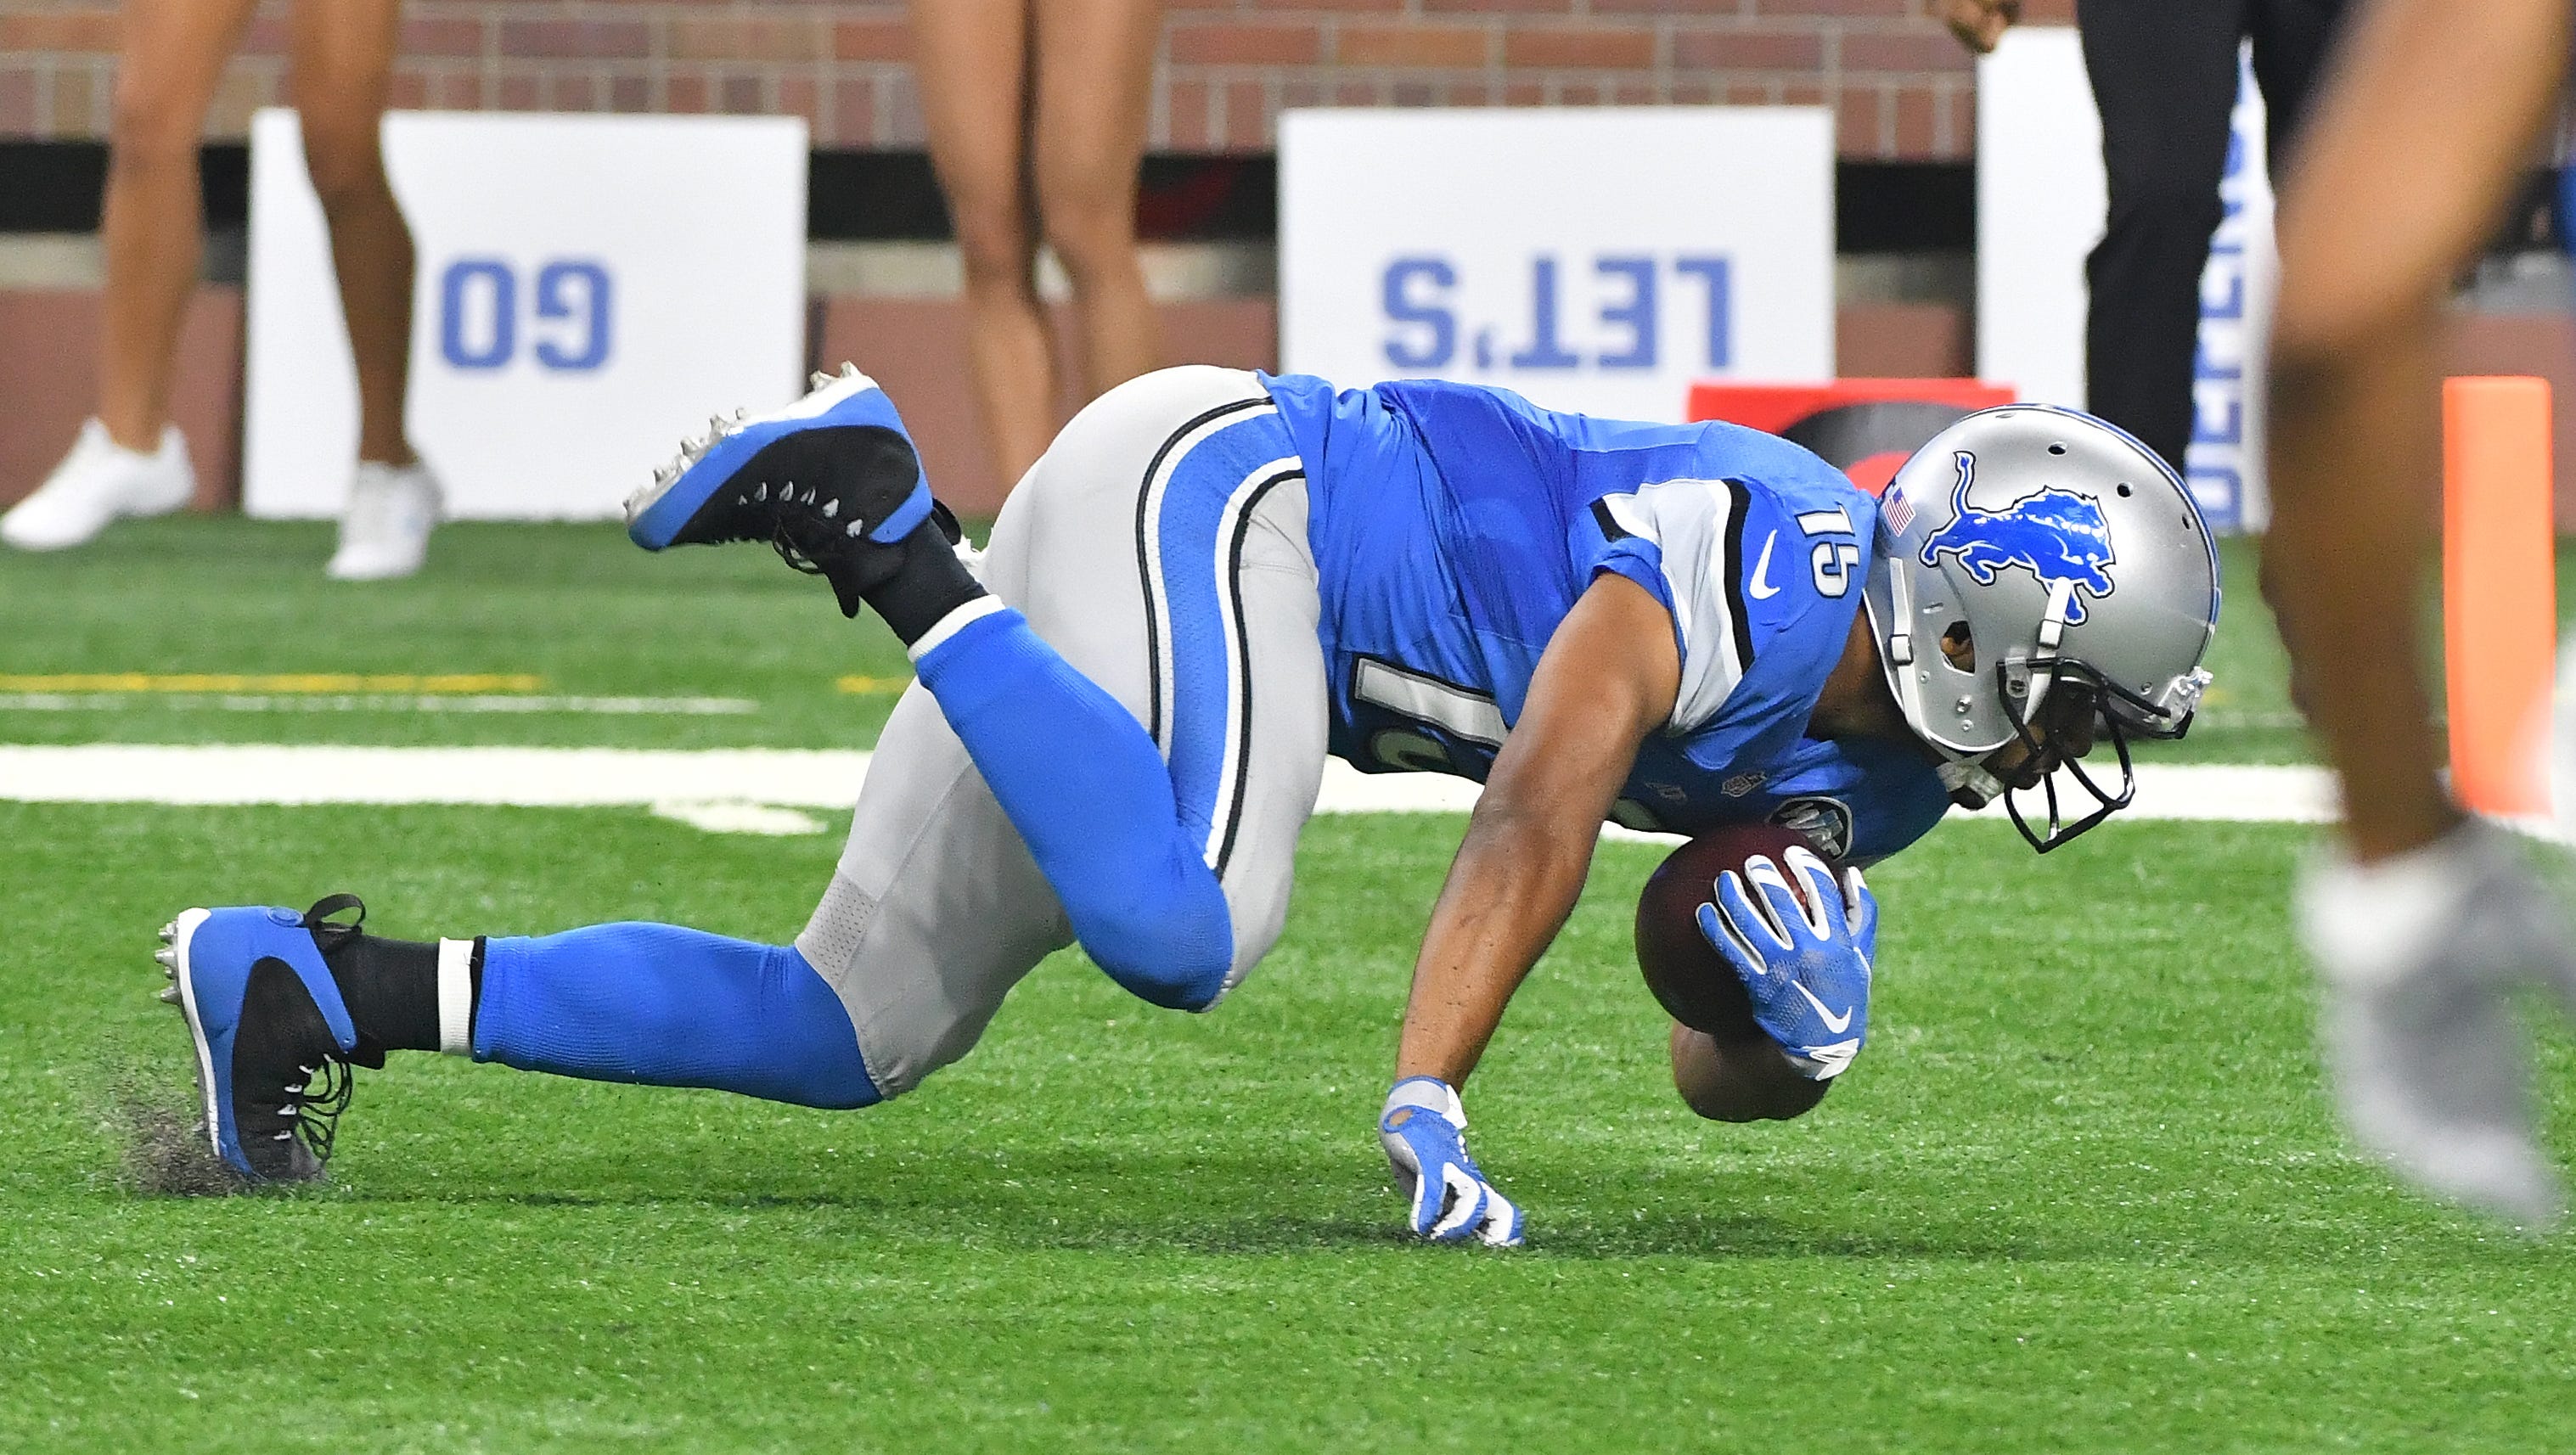 Lions wide receiver Golden Tate continues to crawl towards the goal line into the end zone but after an officials review, Tate was ruled down just short of the goal line.